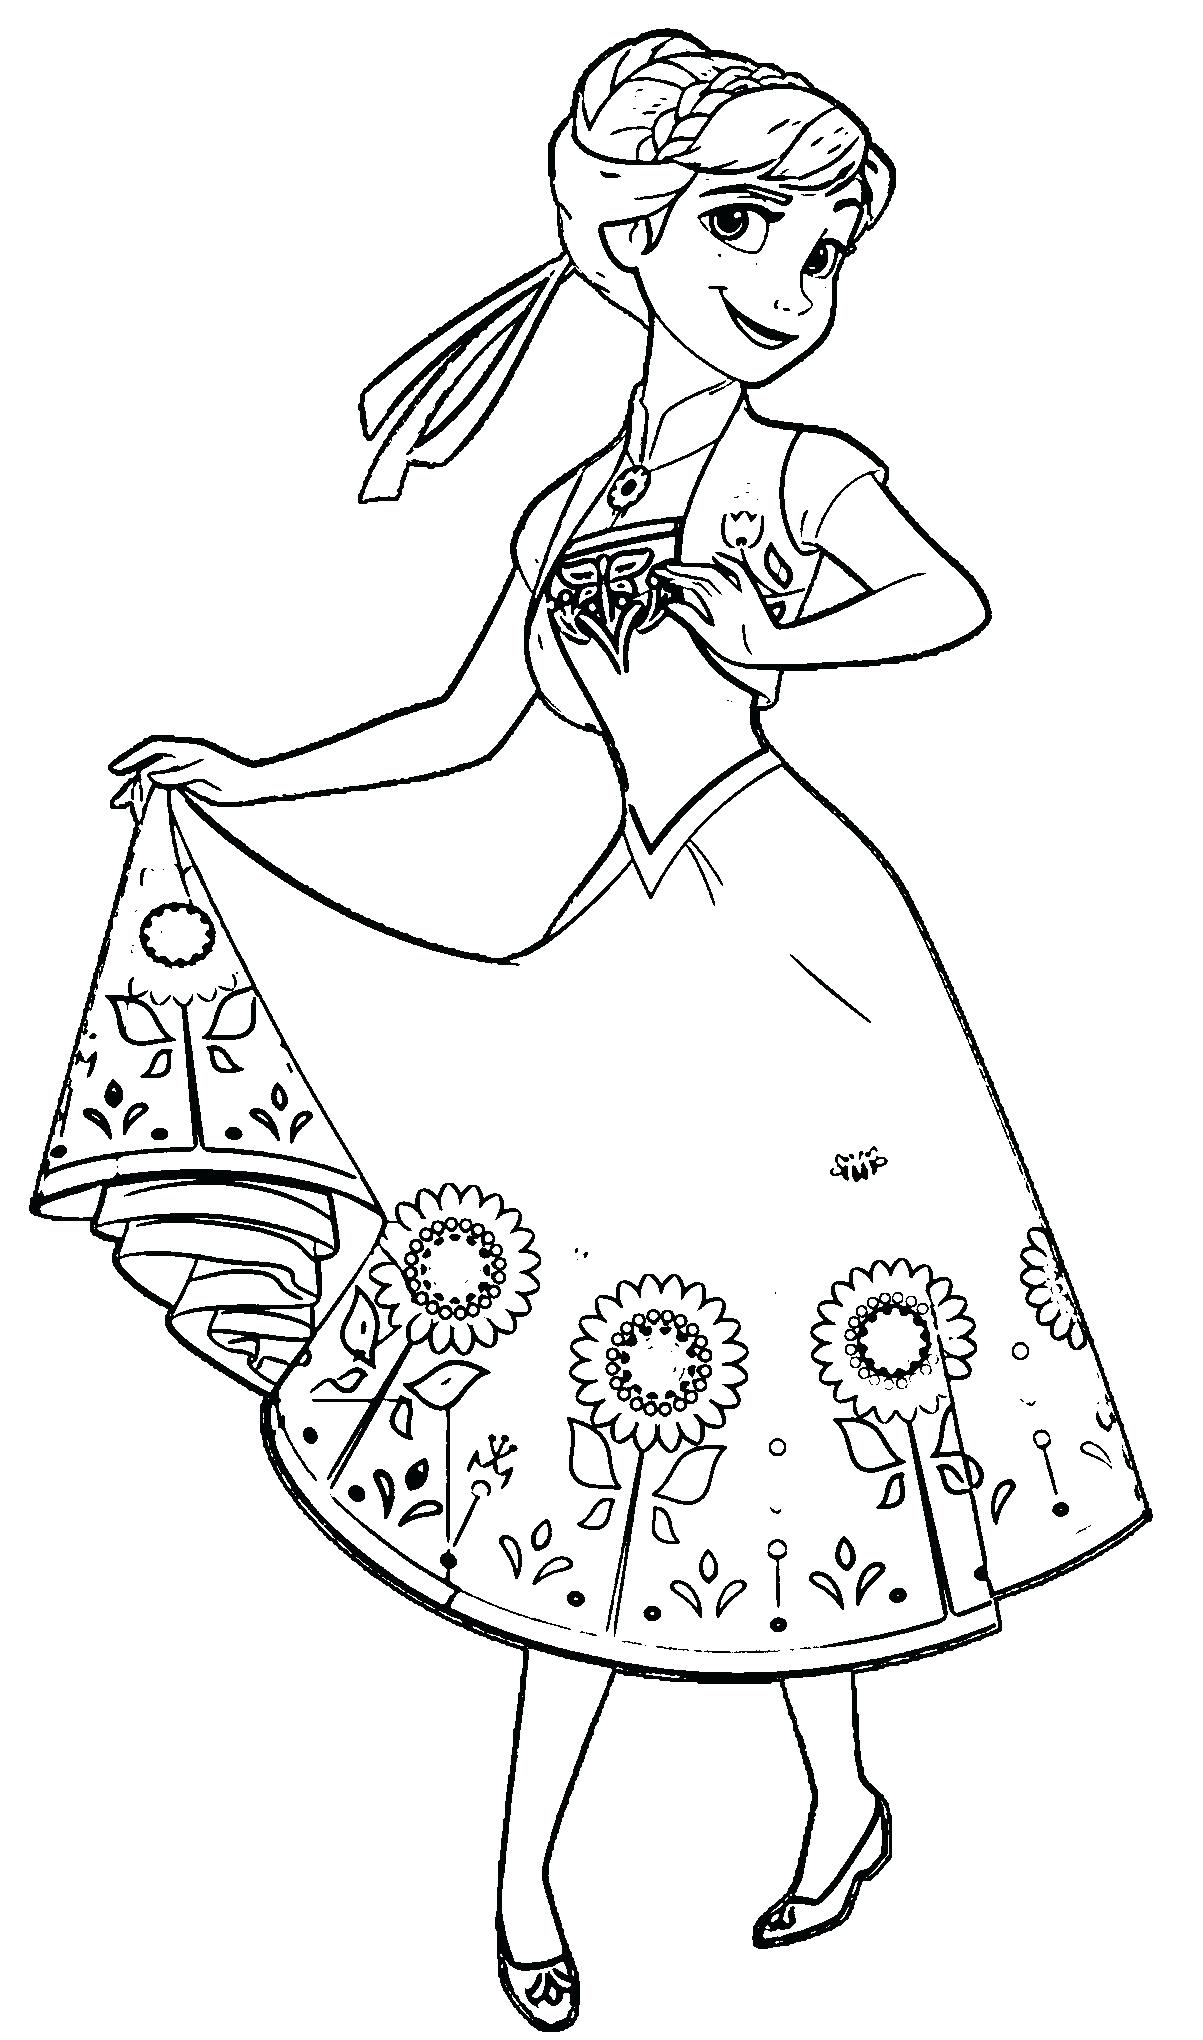 Coloring Pages : Coloring Page Disney Elsa Shieldprint ...